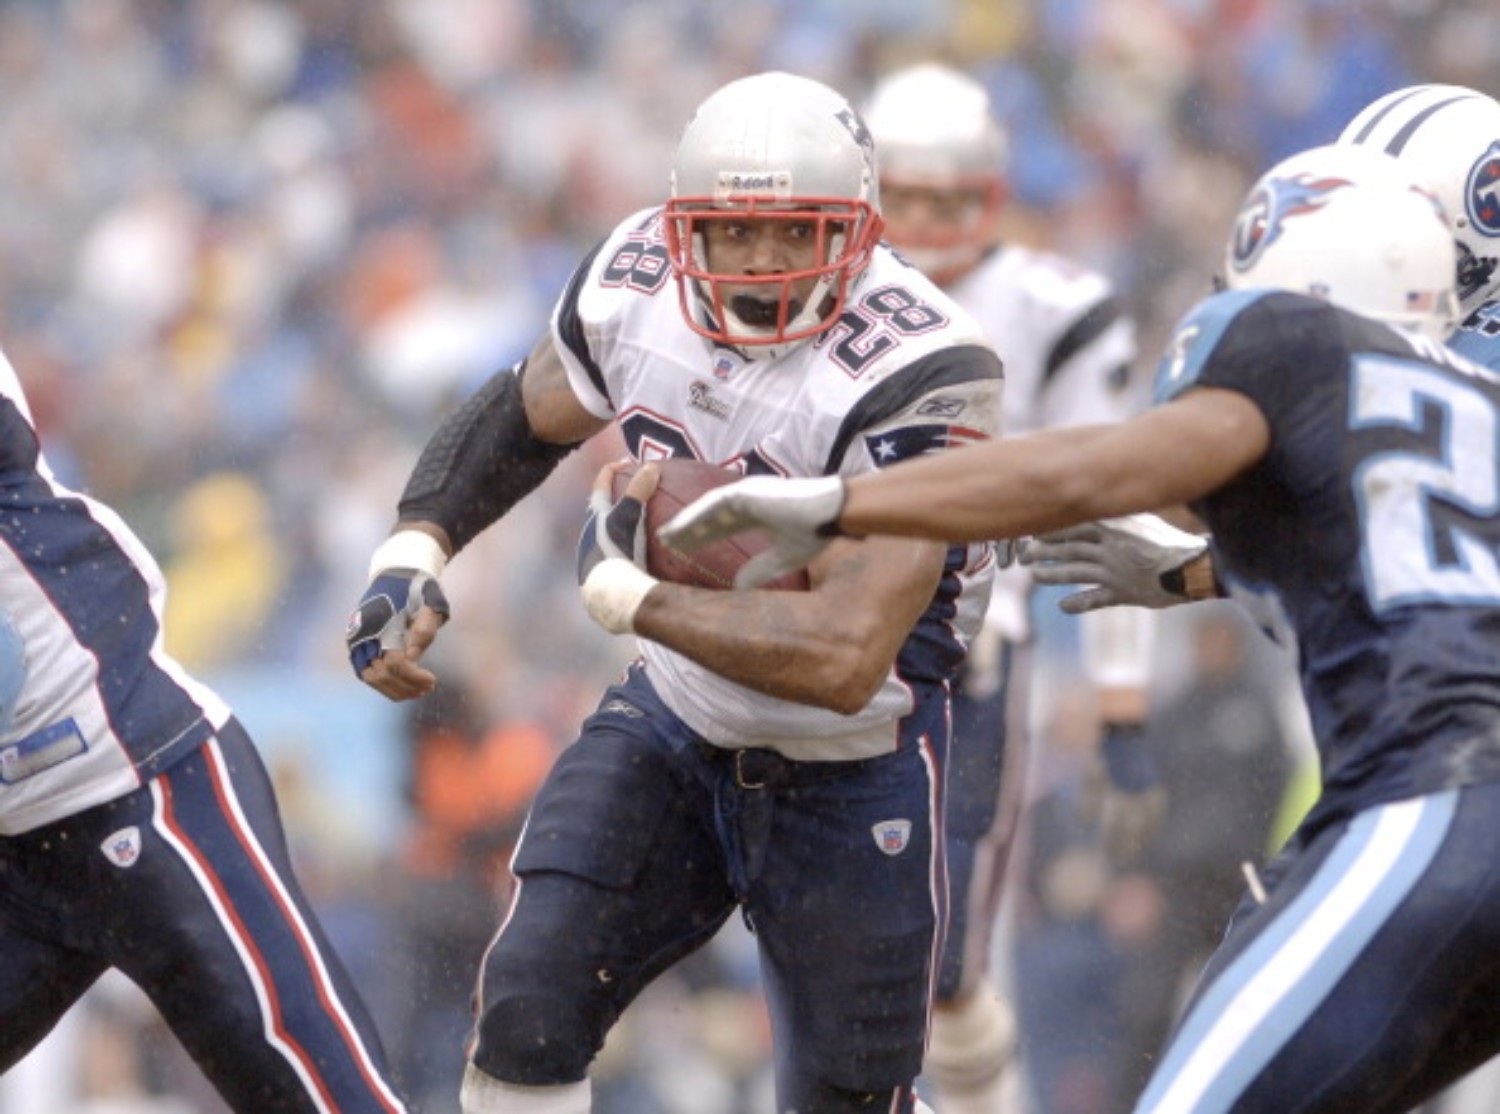 Corey Dillon carries the football for the New England Patriots